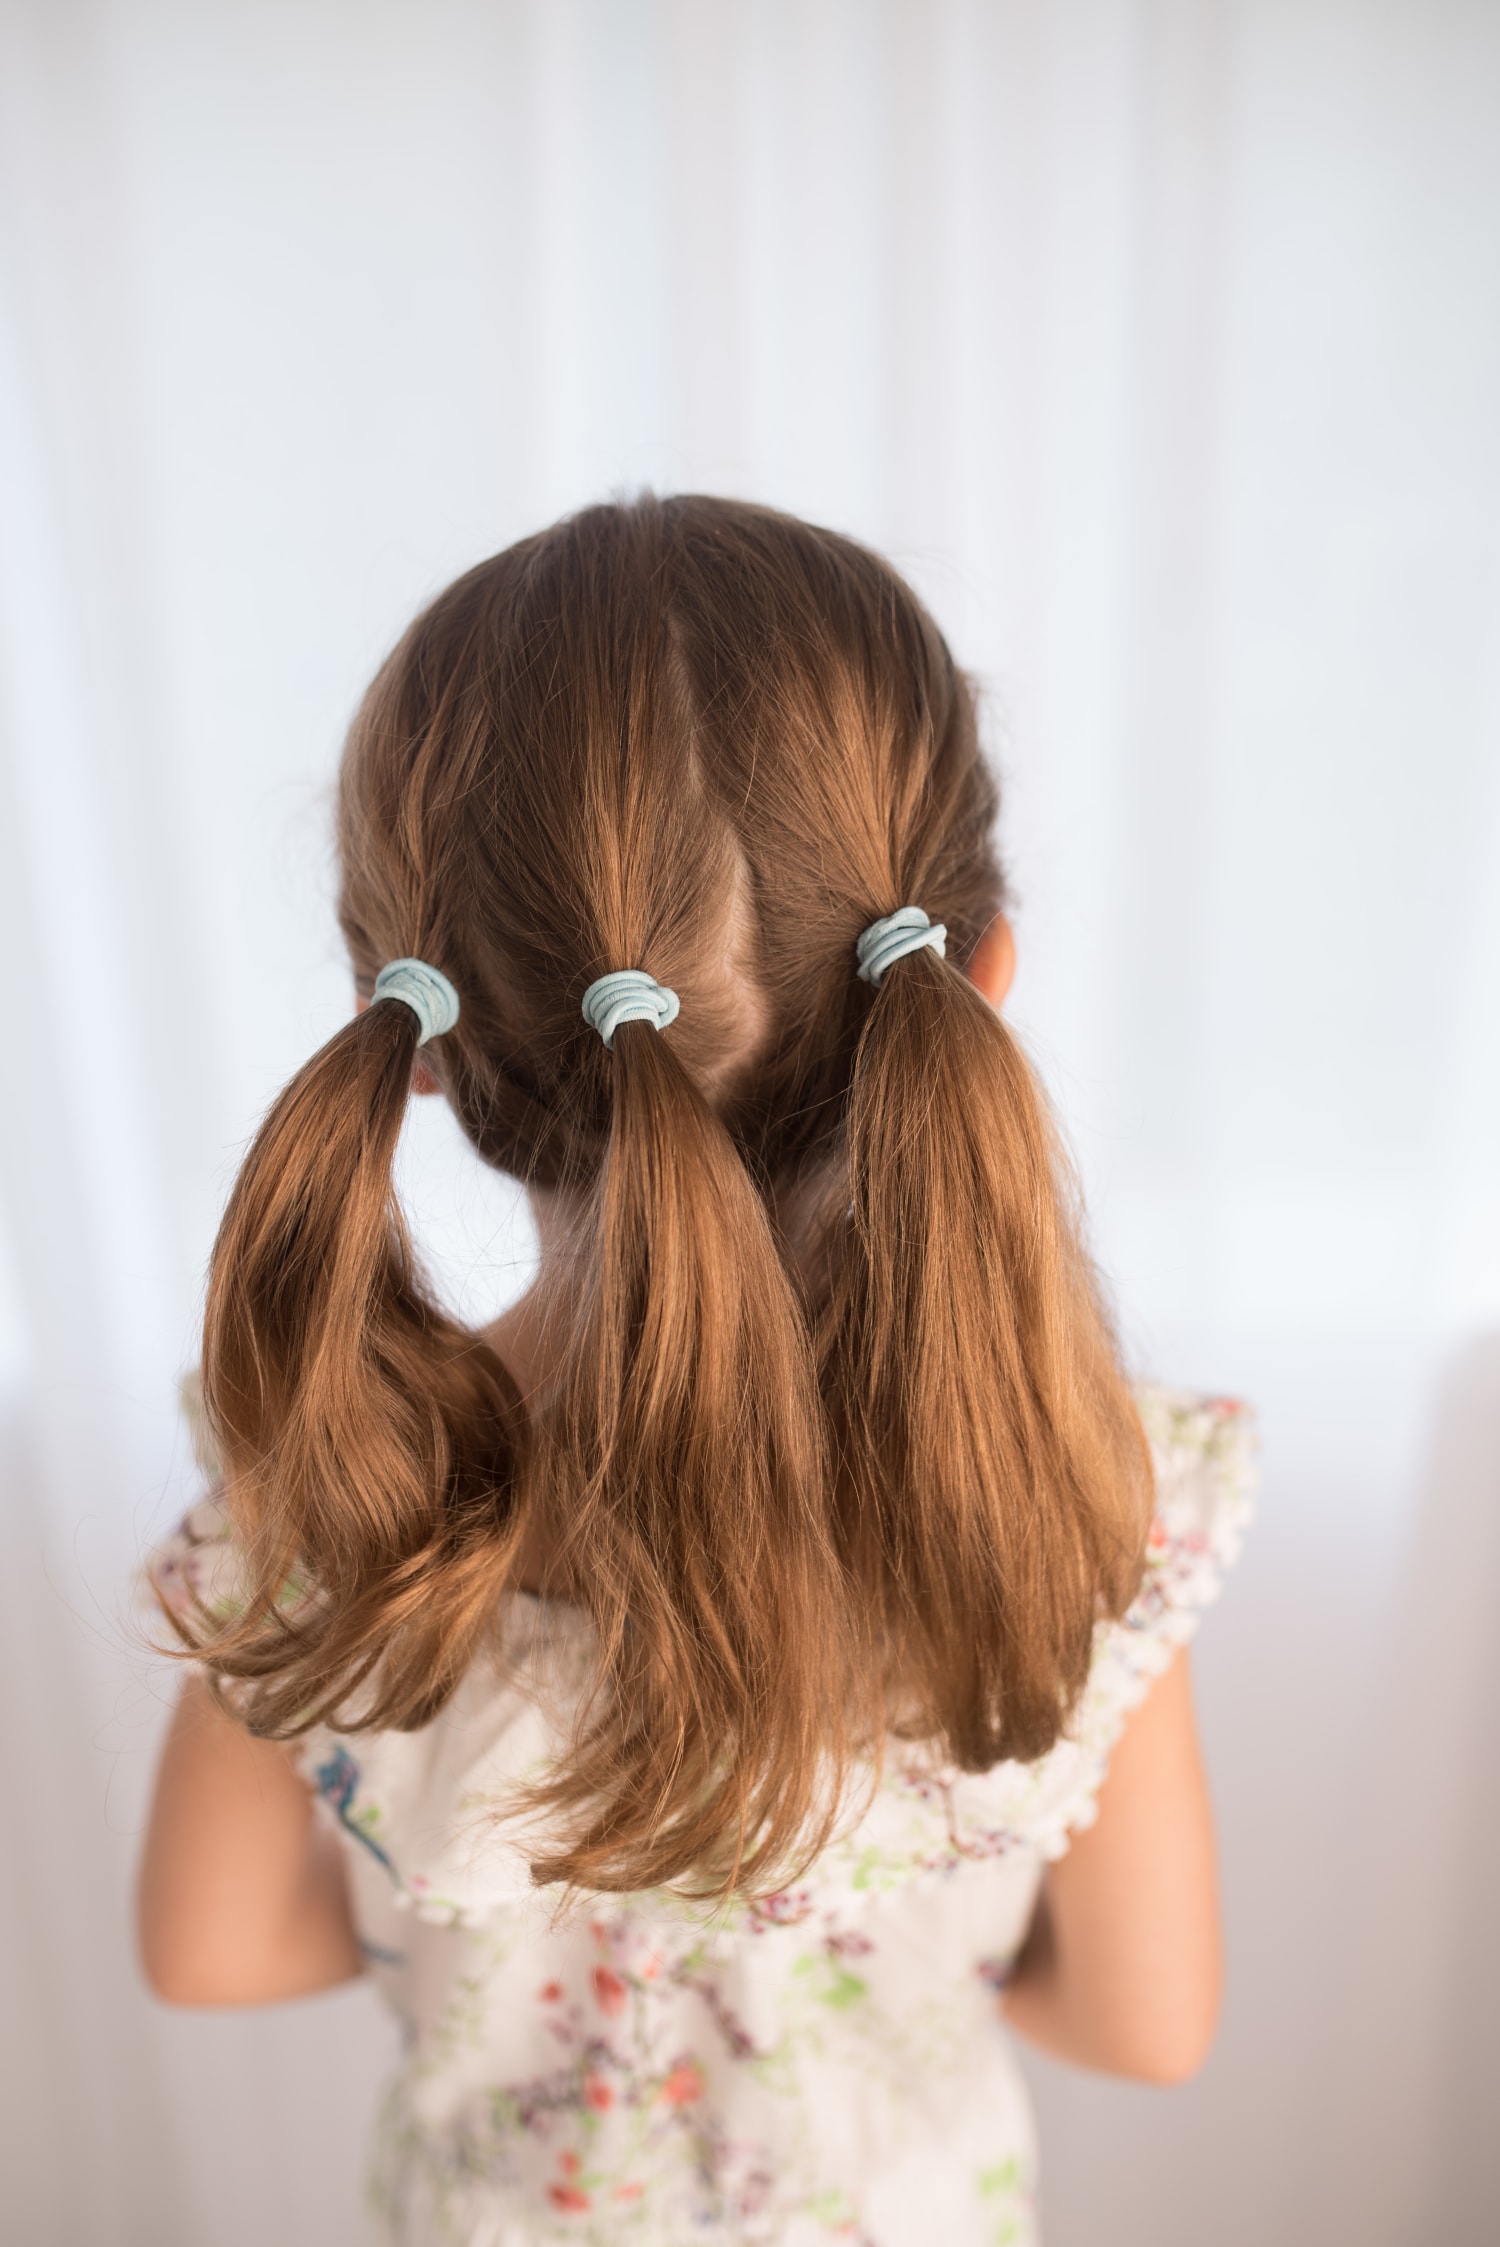 EASY BACK TO SCHOOL HAIRSTYLES IDEAS